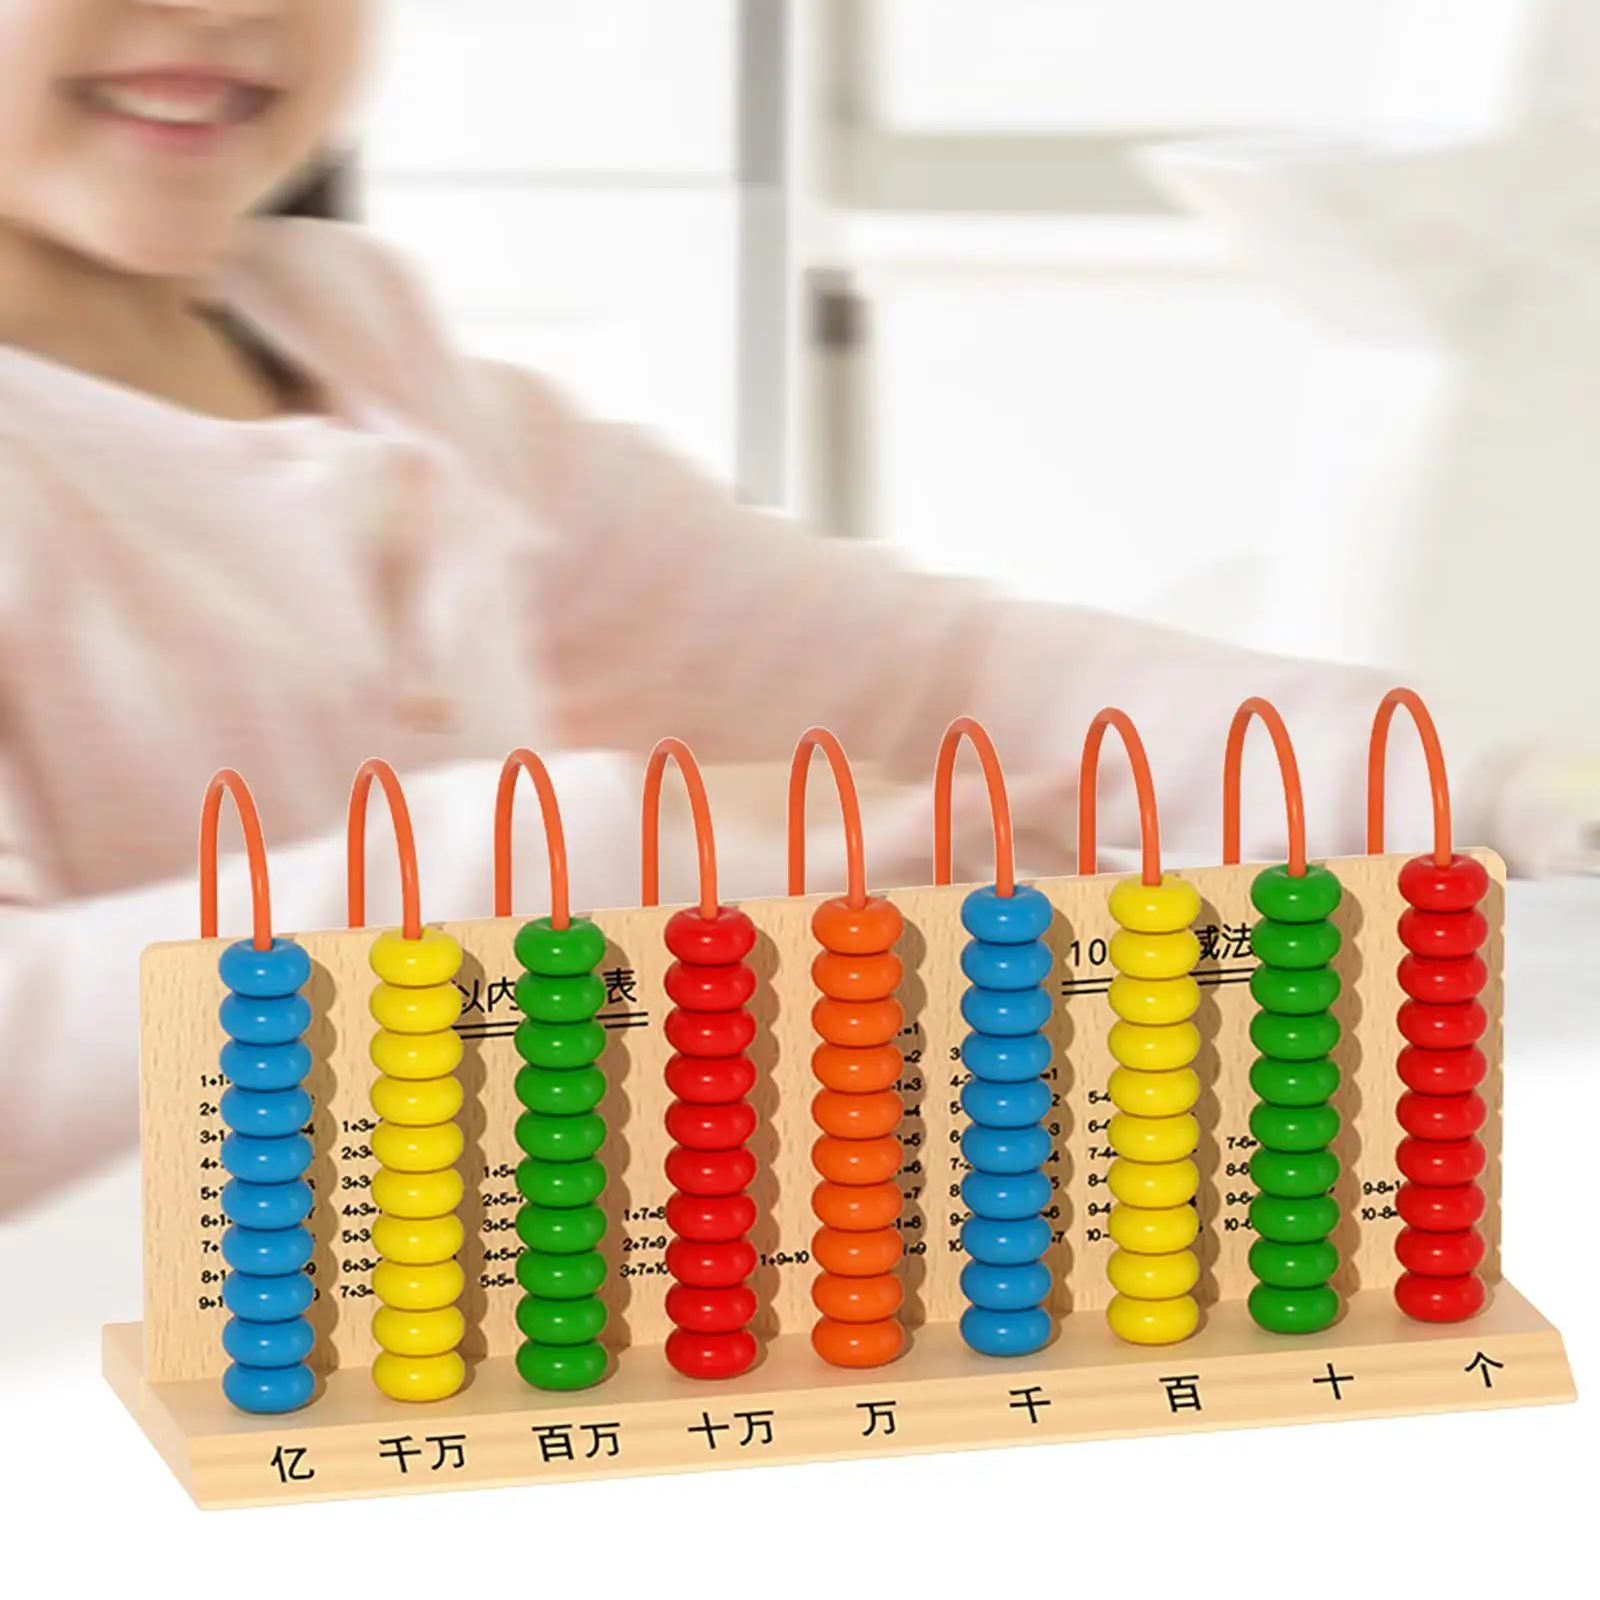 

Math Learning Toys Early Childhood Education Educational Learning Games Wooden Abacus for Kids Boys Preschool Age 4 5 6 Gifts